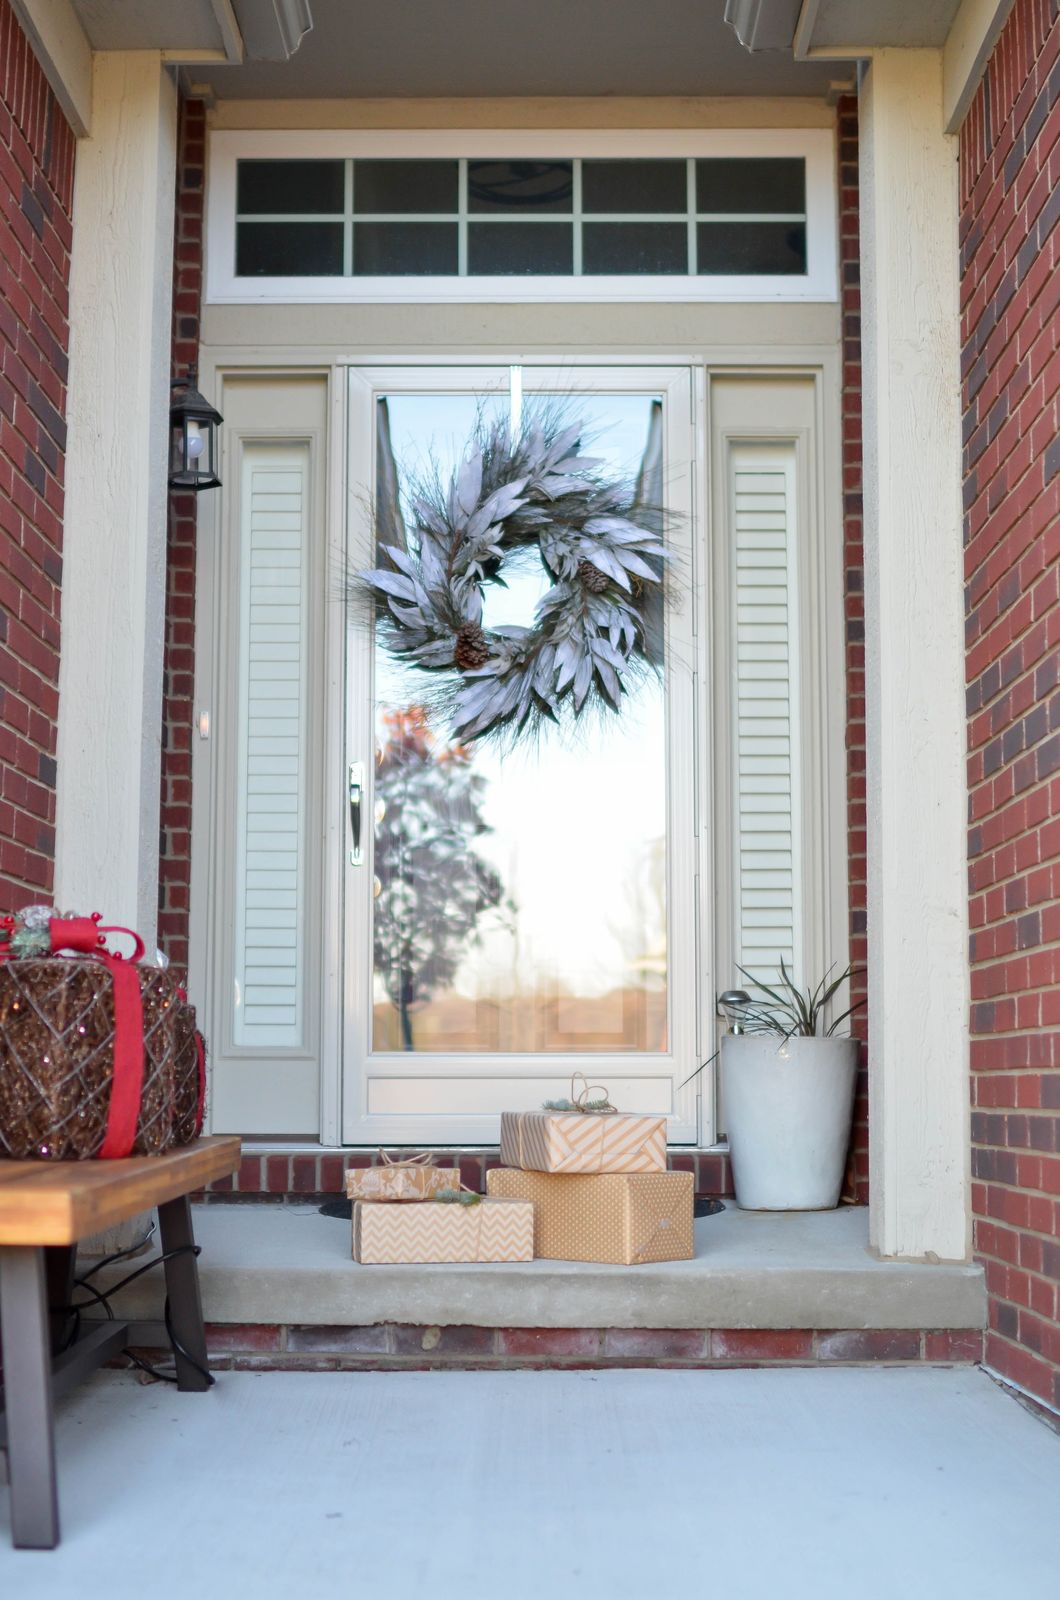 https://www.pexels.com/photo/four-brown-gift-boxes-near-a-glass-paneled-door-with-wreath-712319/